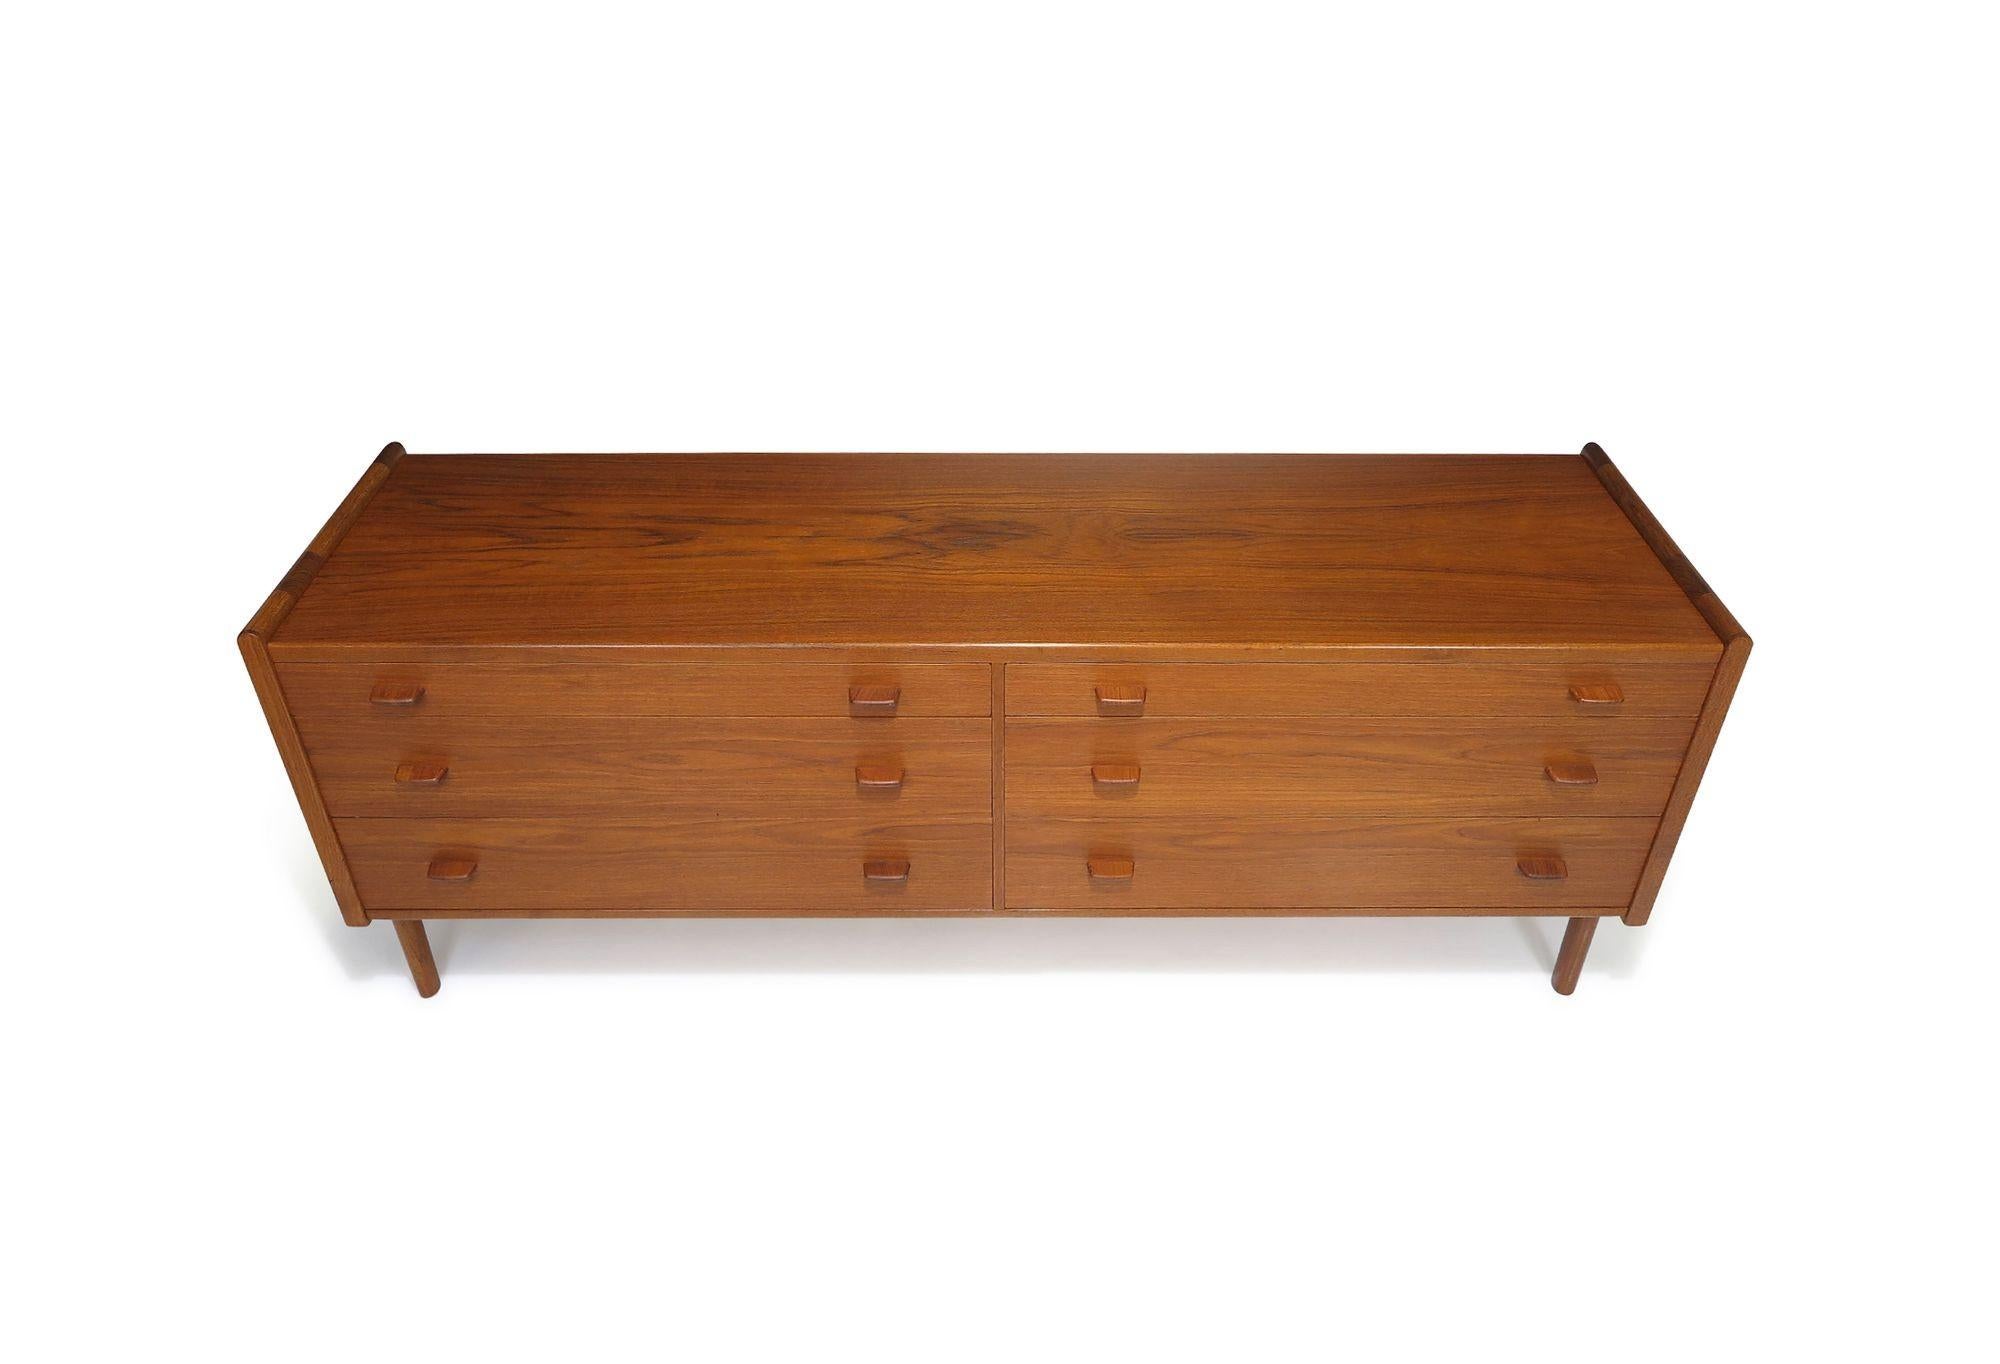 Teak double dresser designed by Hans Wegner for Ry Mobler, Denmark, in 1958. This finely crafted cabinet features six drawers, each adorned with sculpted pulls and birch interiors. Raised on solid teak legs, the dresser is meticulously finished on